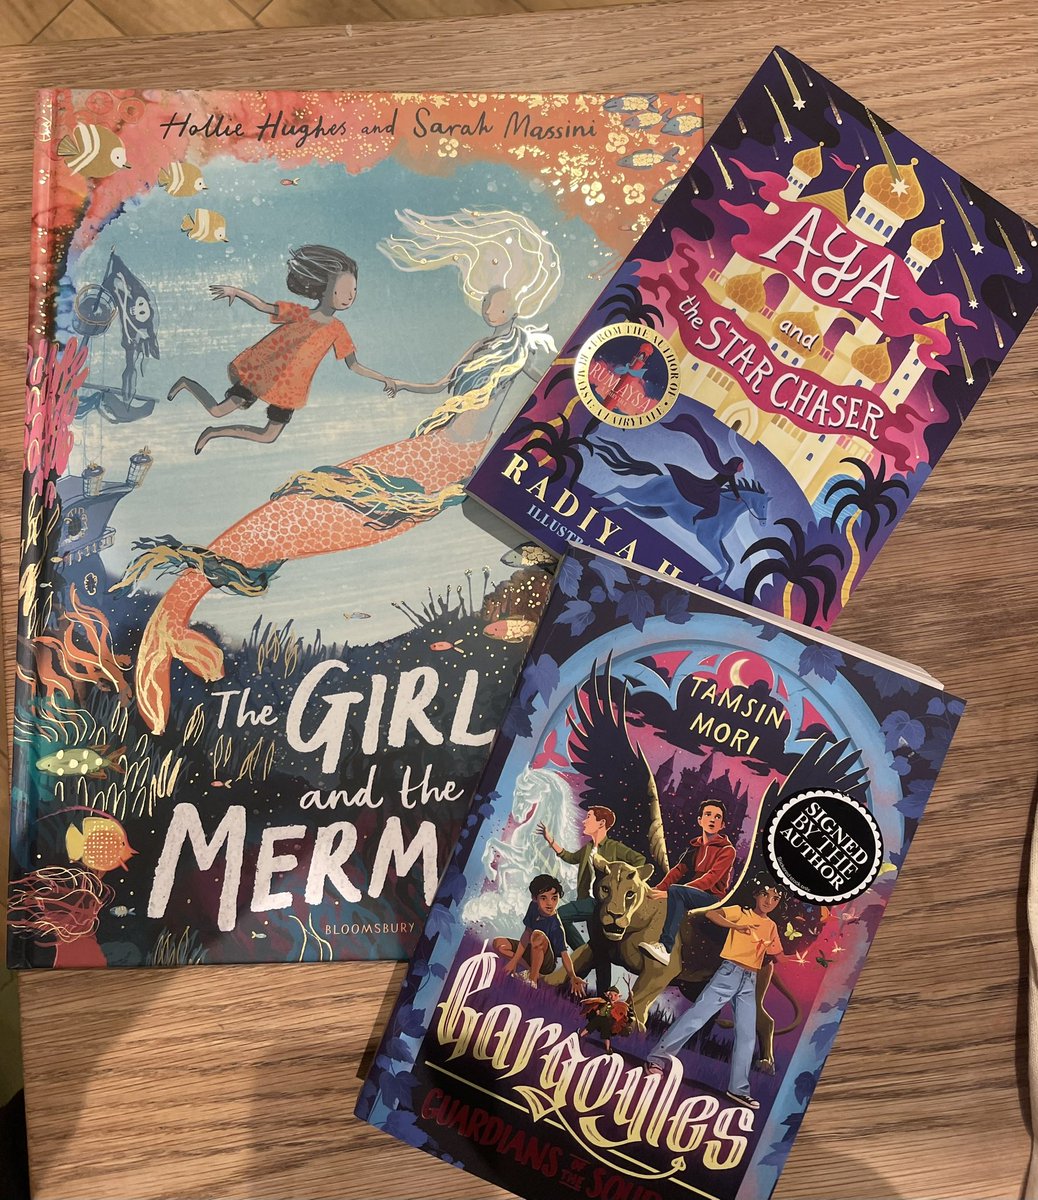 Waiting to see hear Lemony Snicket at @ywbath …. Somehow these fell into my hands. Can’t work out how that happened @MoriTamsin @publishinguclan @radiyahafiza @panmacmillan #HollieHughes @SarahMassini @KidsBloomsbury